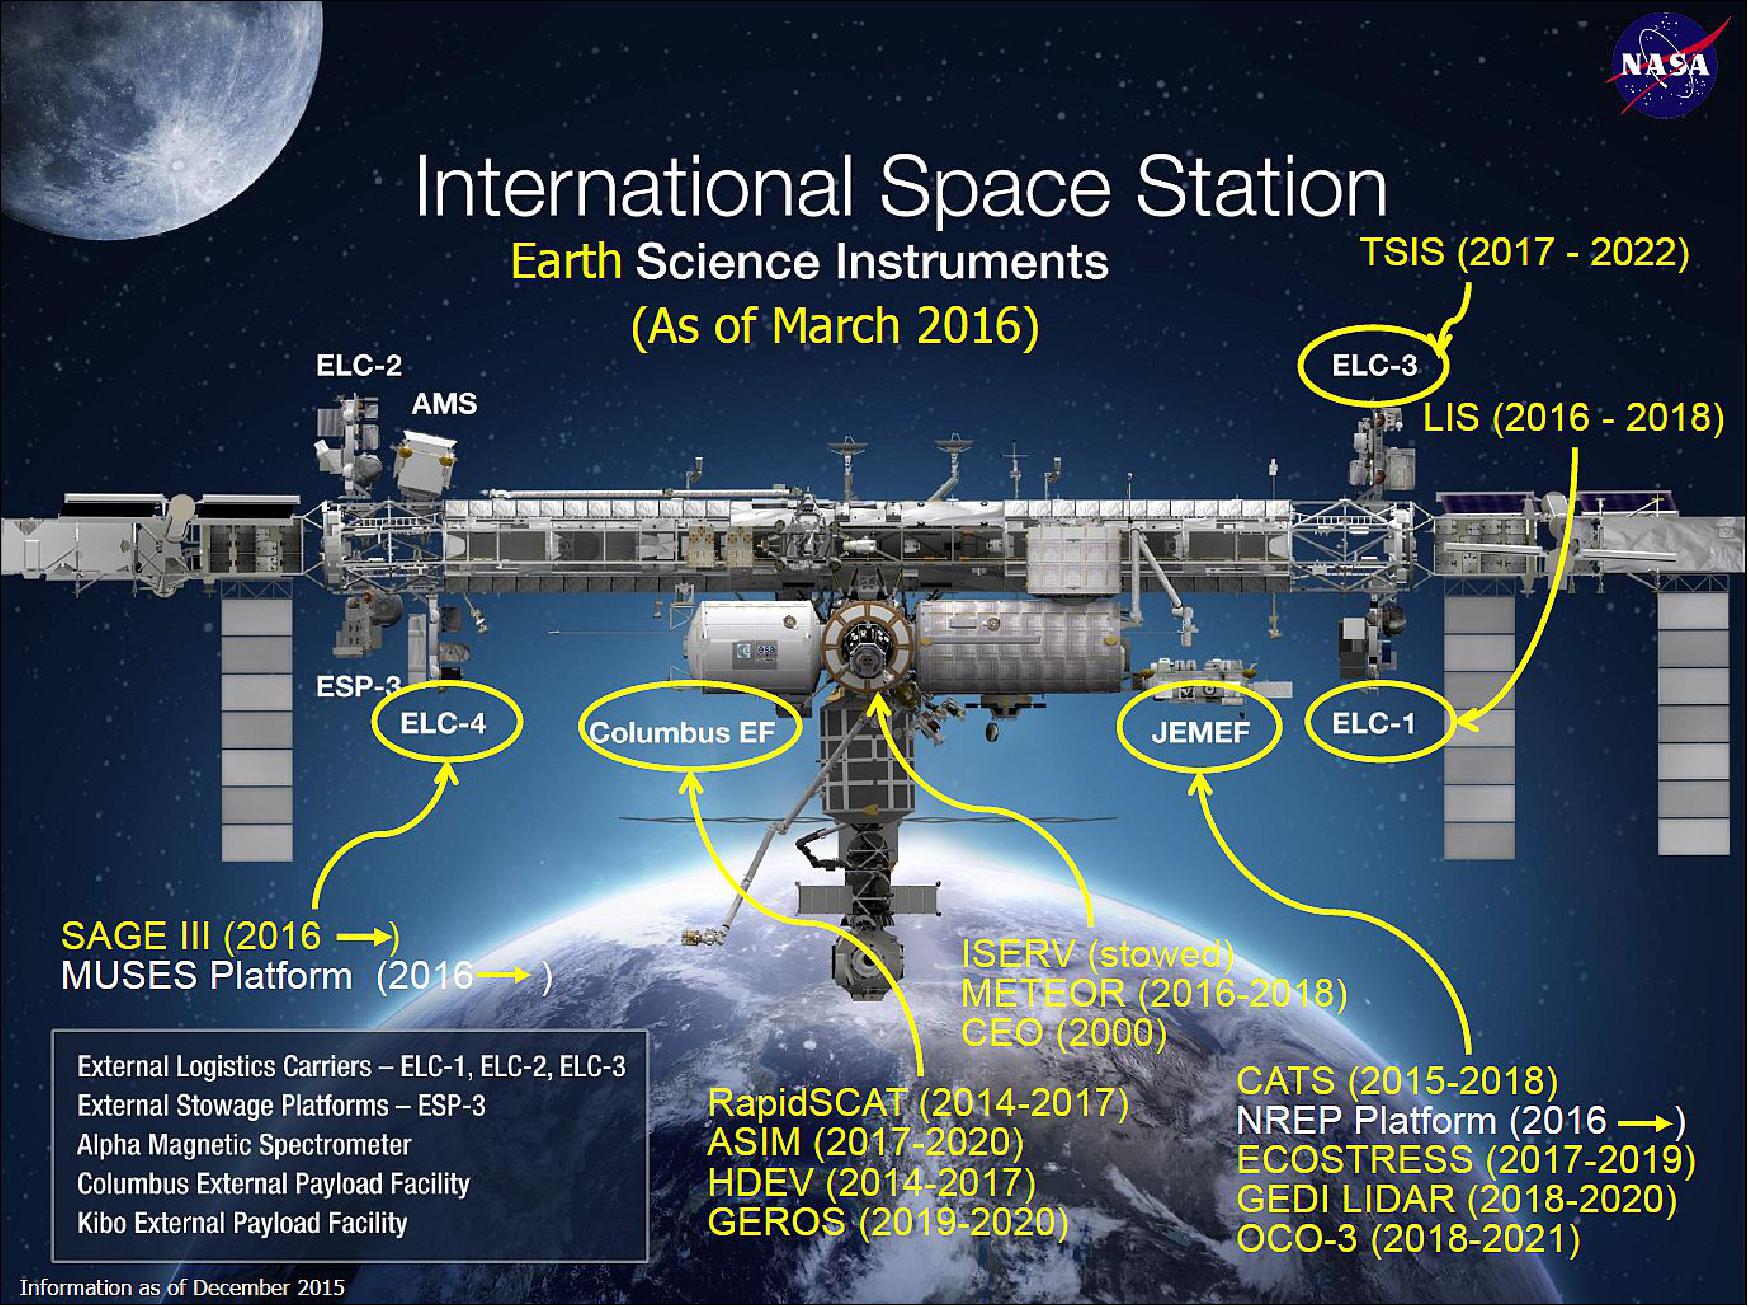 Figure 1: Overview of Earth science instruments on the ISS (installed or planned) in the second decade of the 21st century (image credit: NASA) 7)